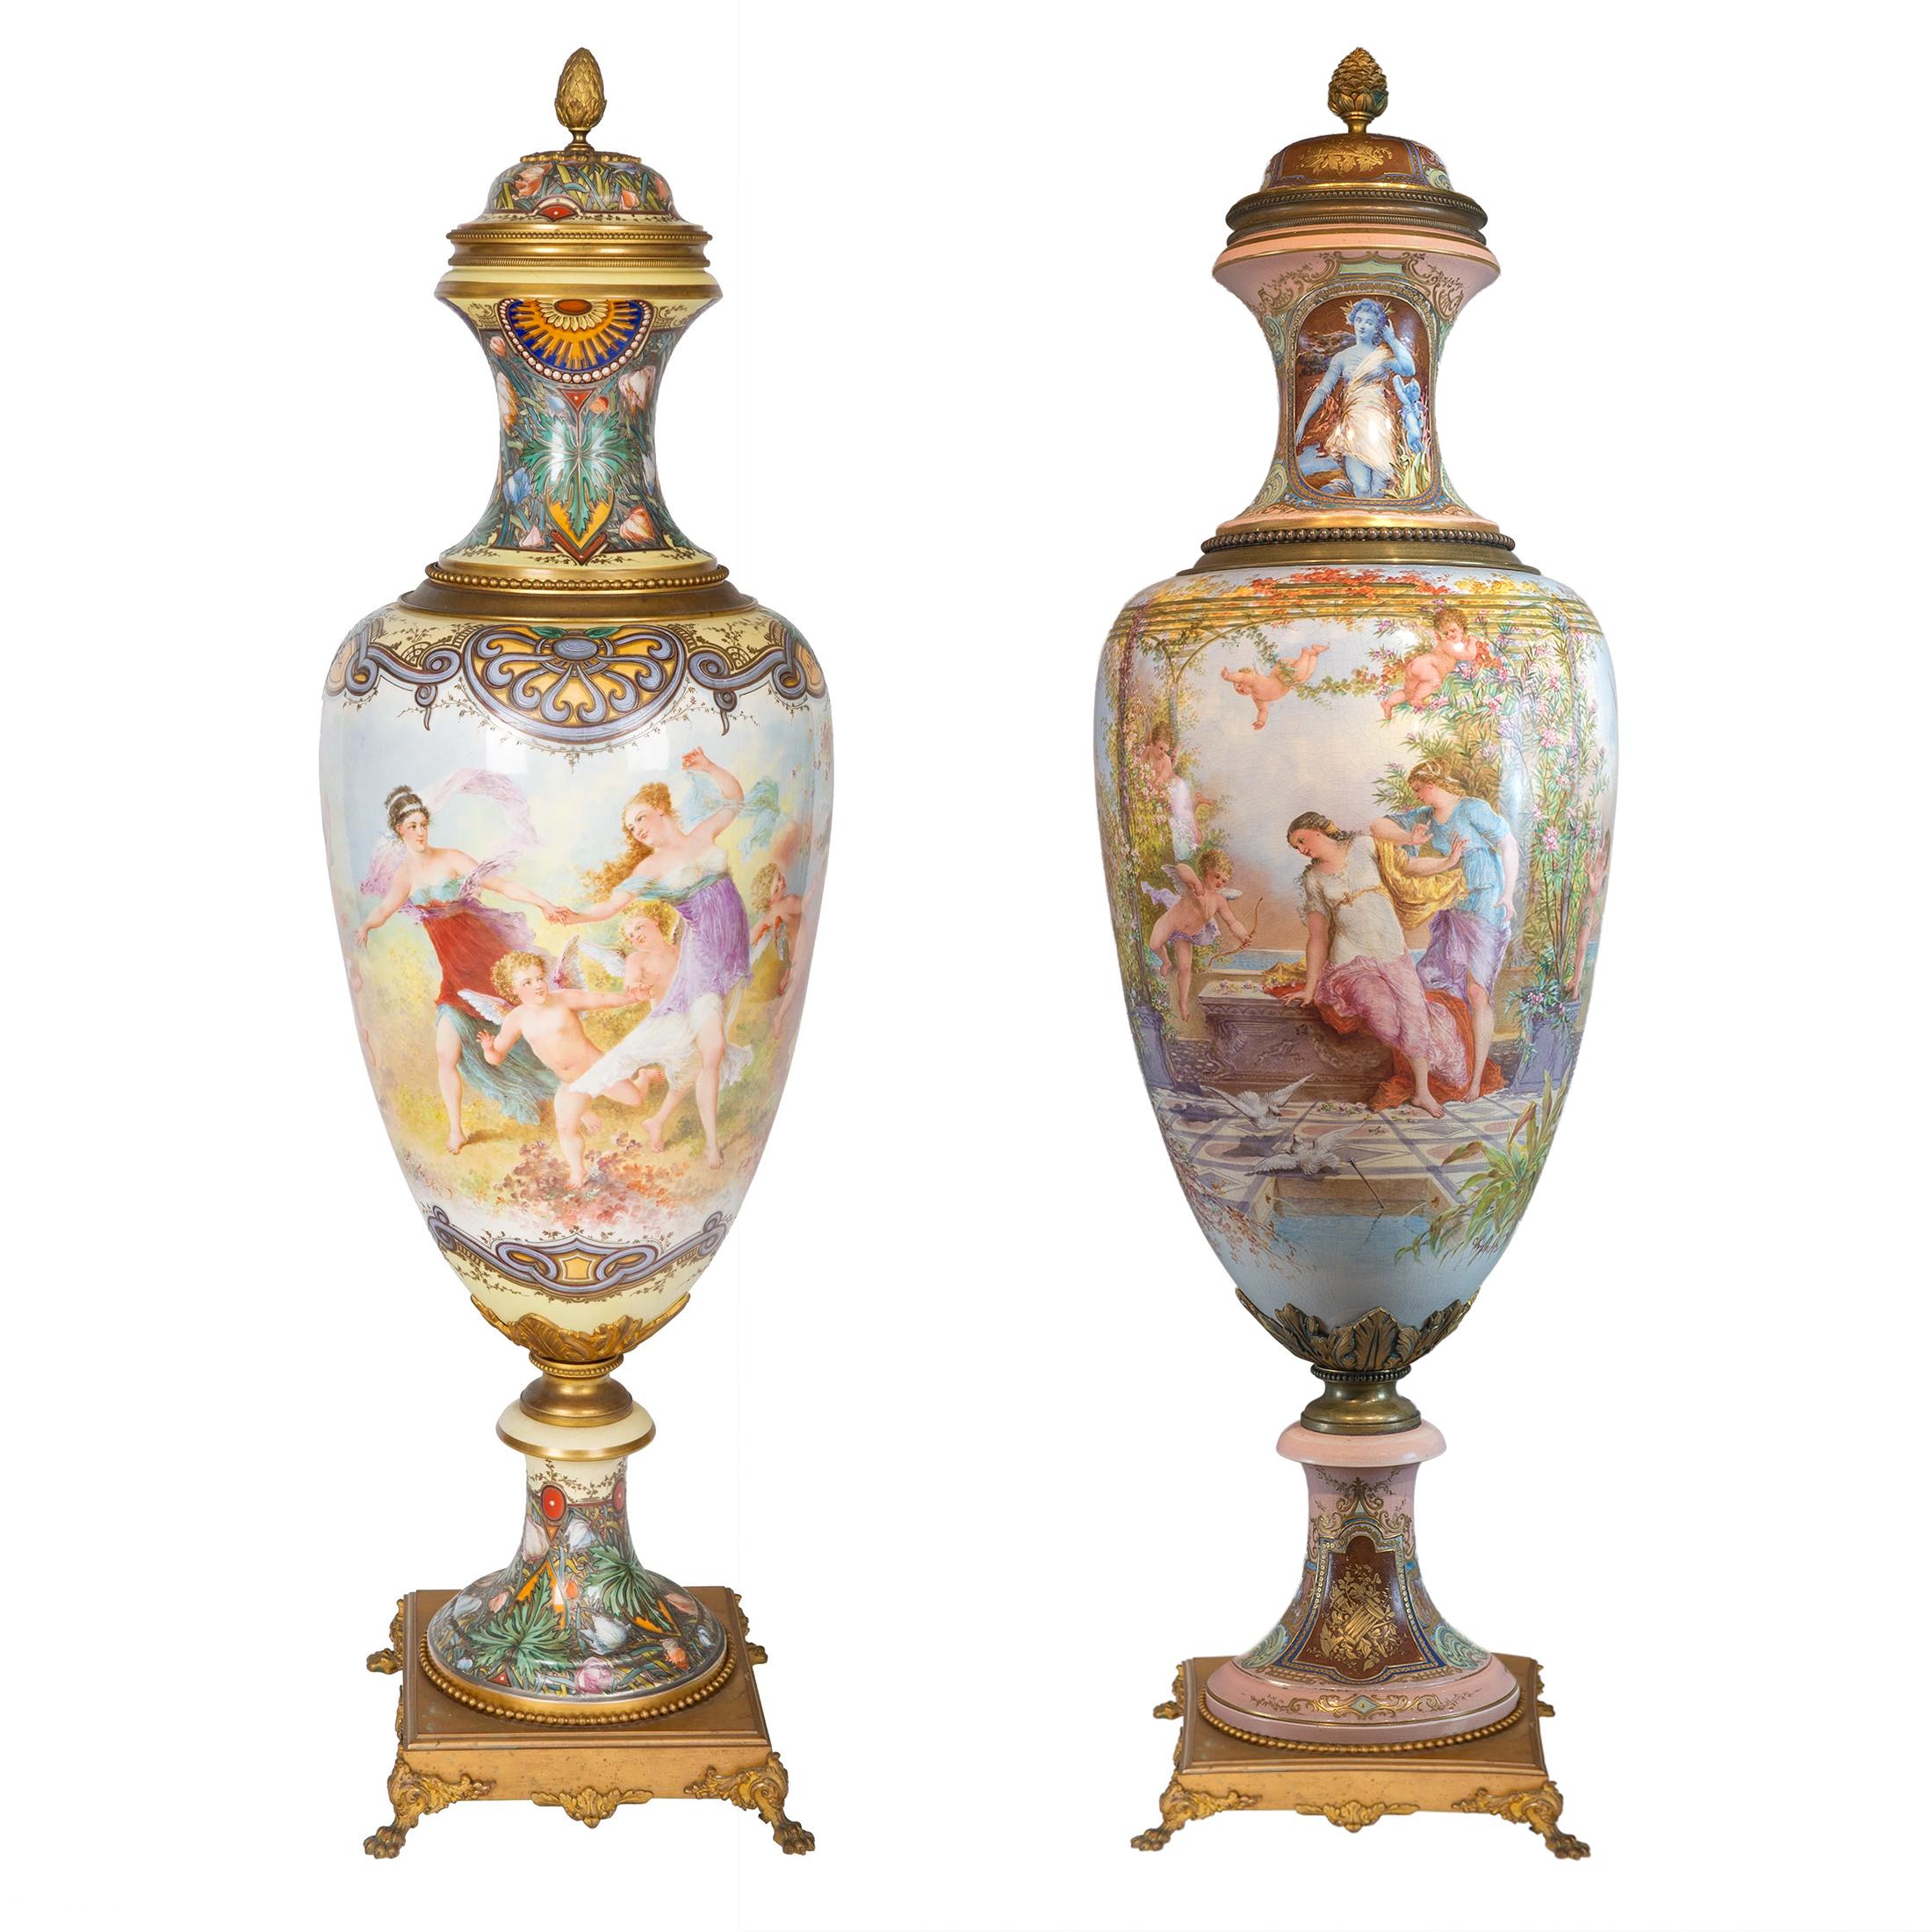 The spectacular Sèvres urn is magnificently painted with two beautiful maidens at a well surrounded by vegetation and several cupids, signed ‘Ch. Fuchs’.

The other a stunning monumental gilt bronze-mounted Sèvres style vase and cover, painted